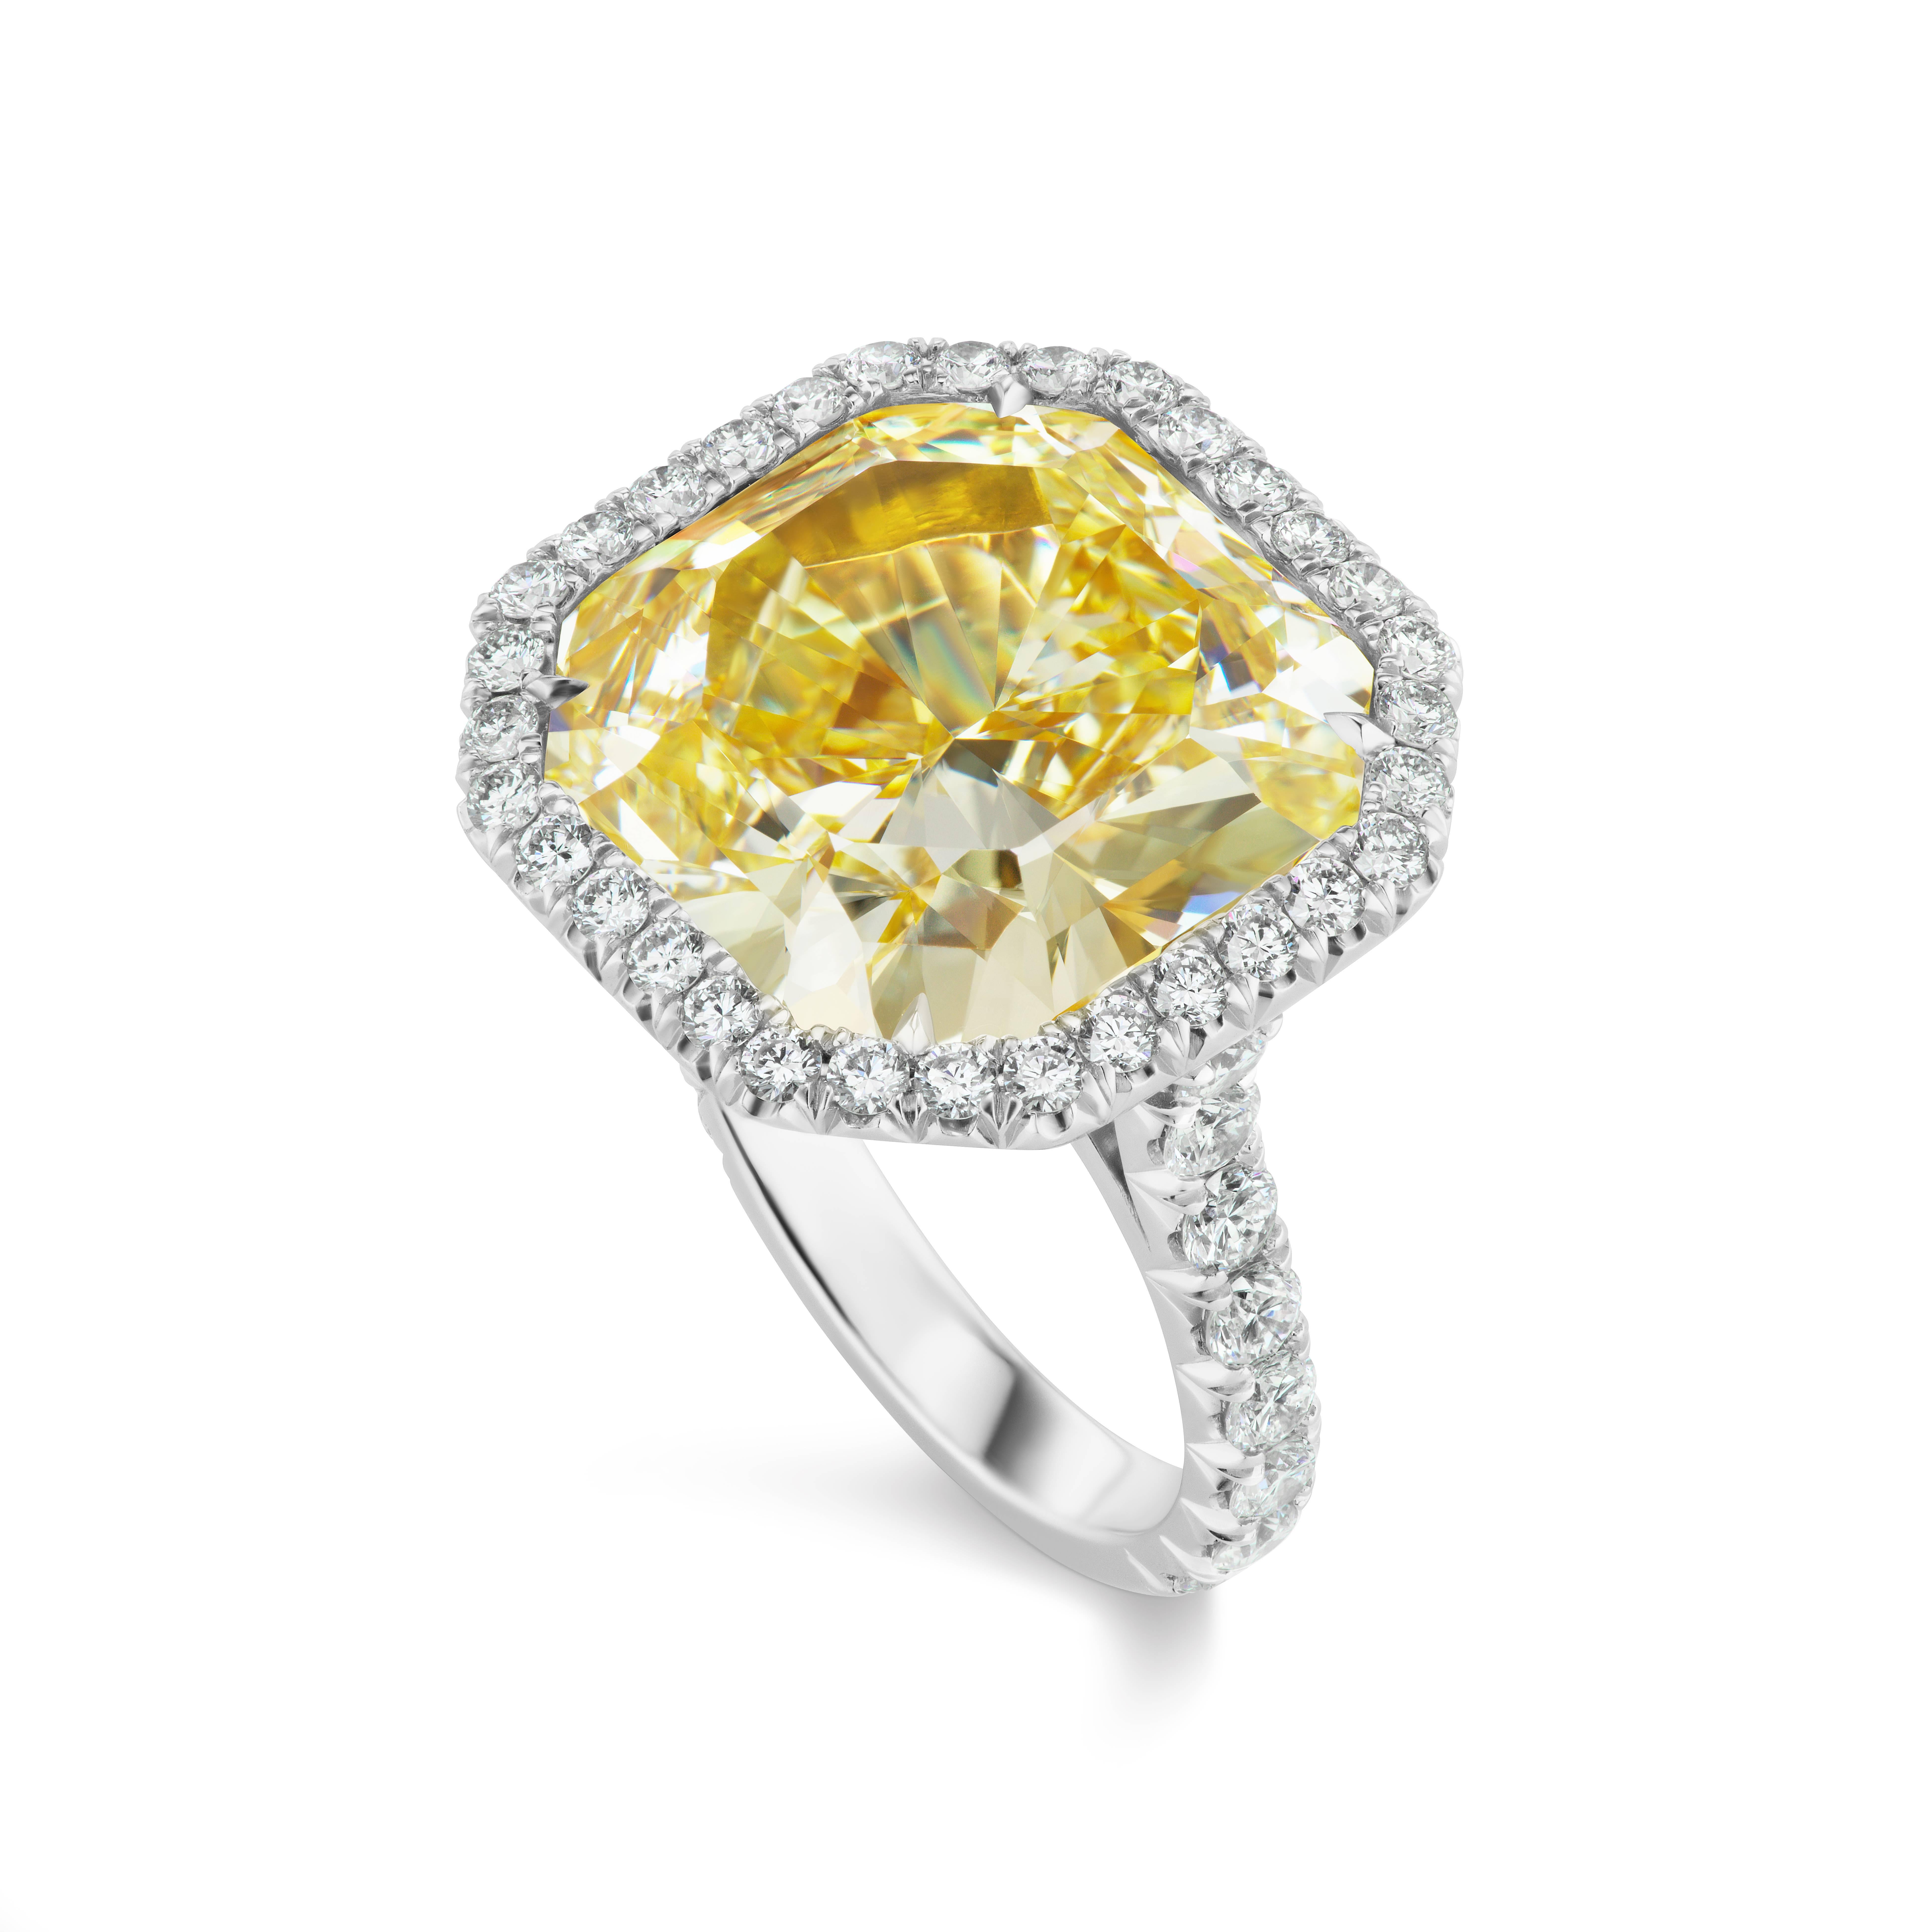 This Beautiful Classic Ring From Scarselli features a 15.03 carat Fancy Intense Yellow  Radiant Cut Diamond with a GIA certificate.  The center diamond is surrounded by 48 round brilliant white diamonds totaling 1.66 carat. The mounting is platinum